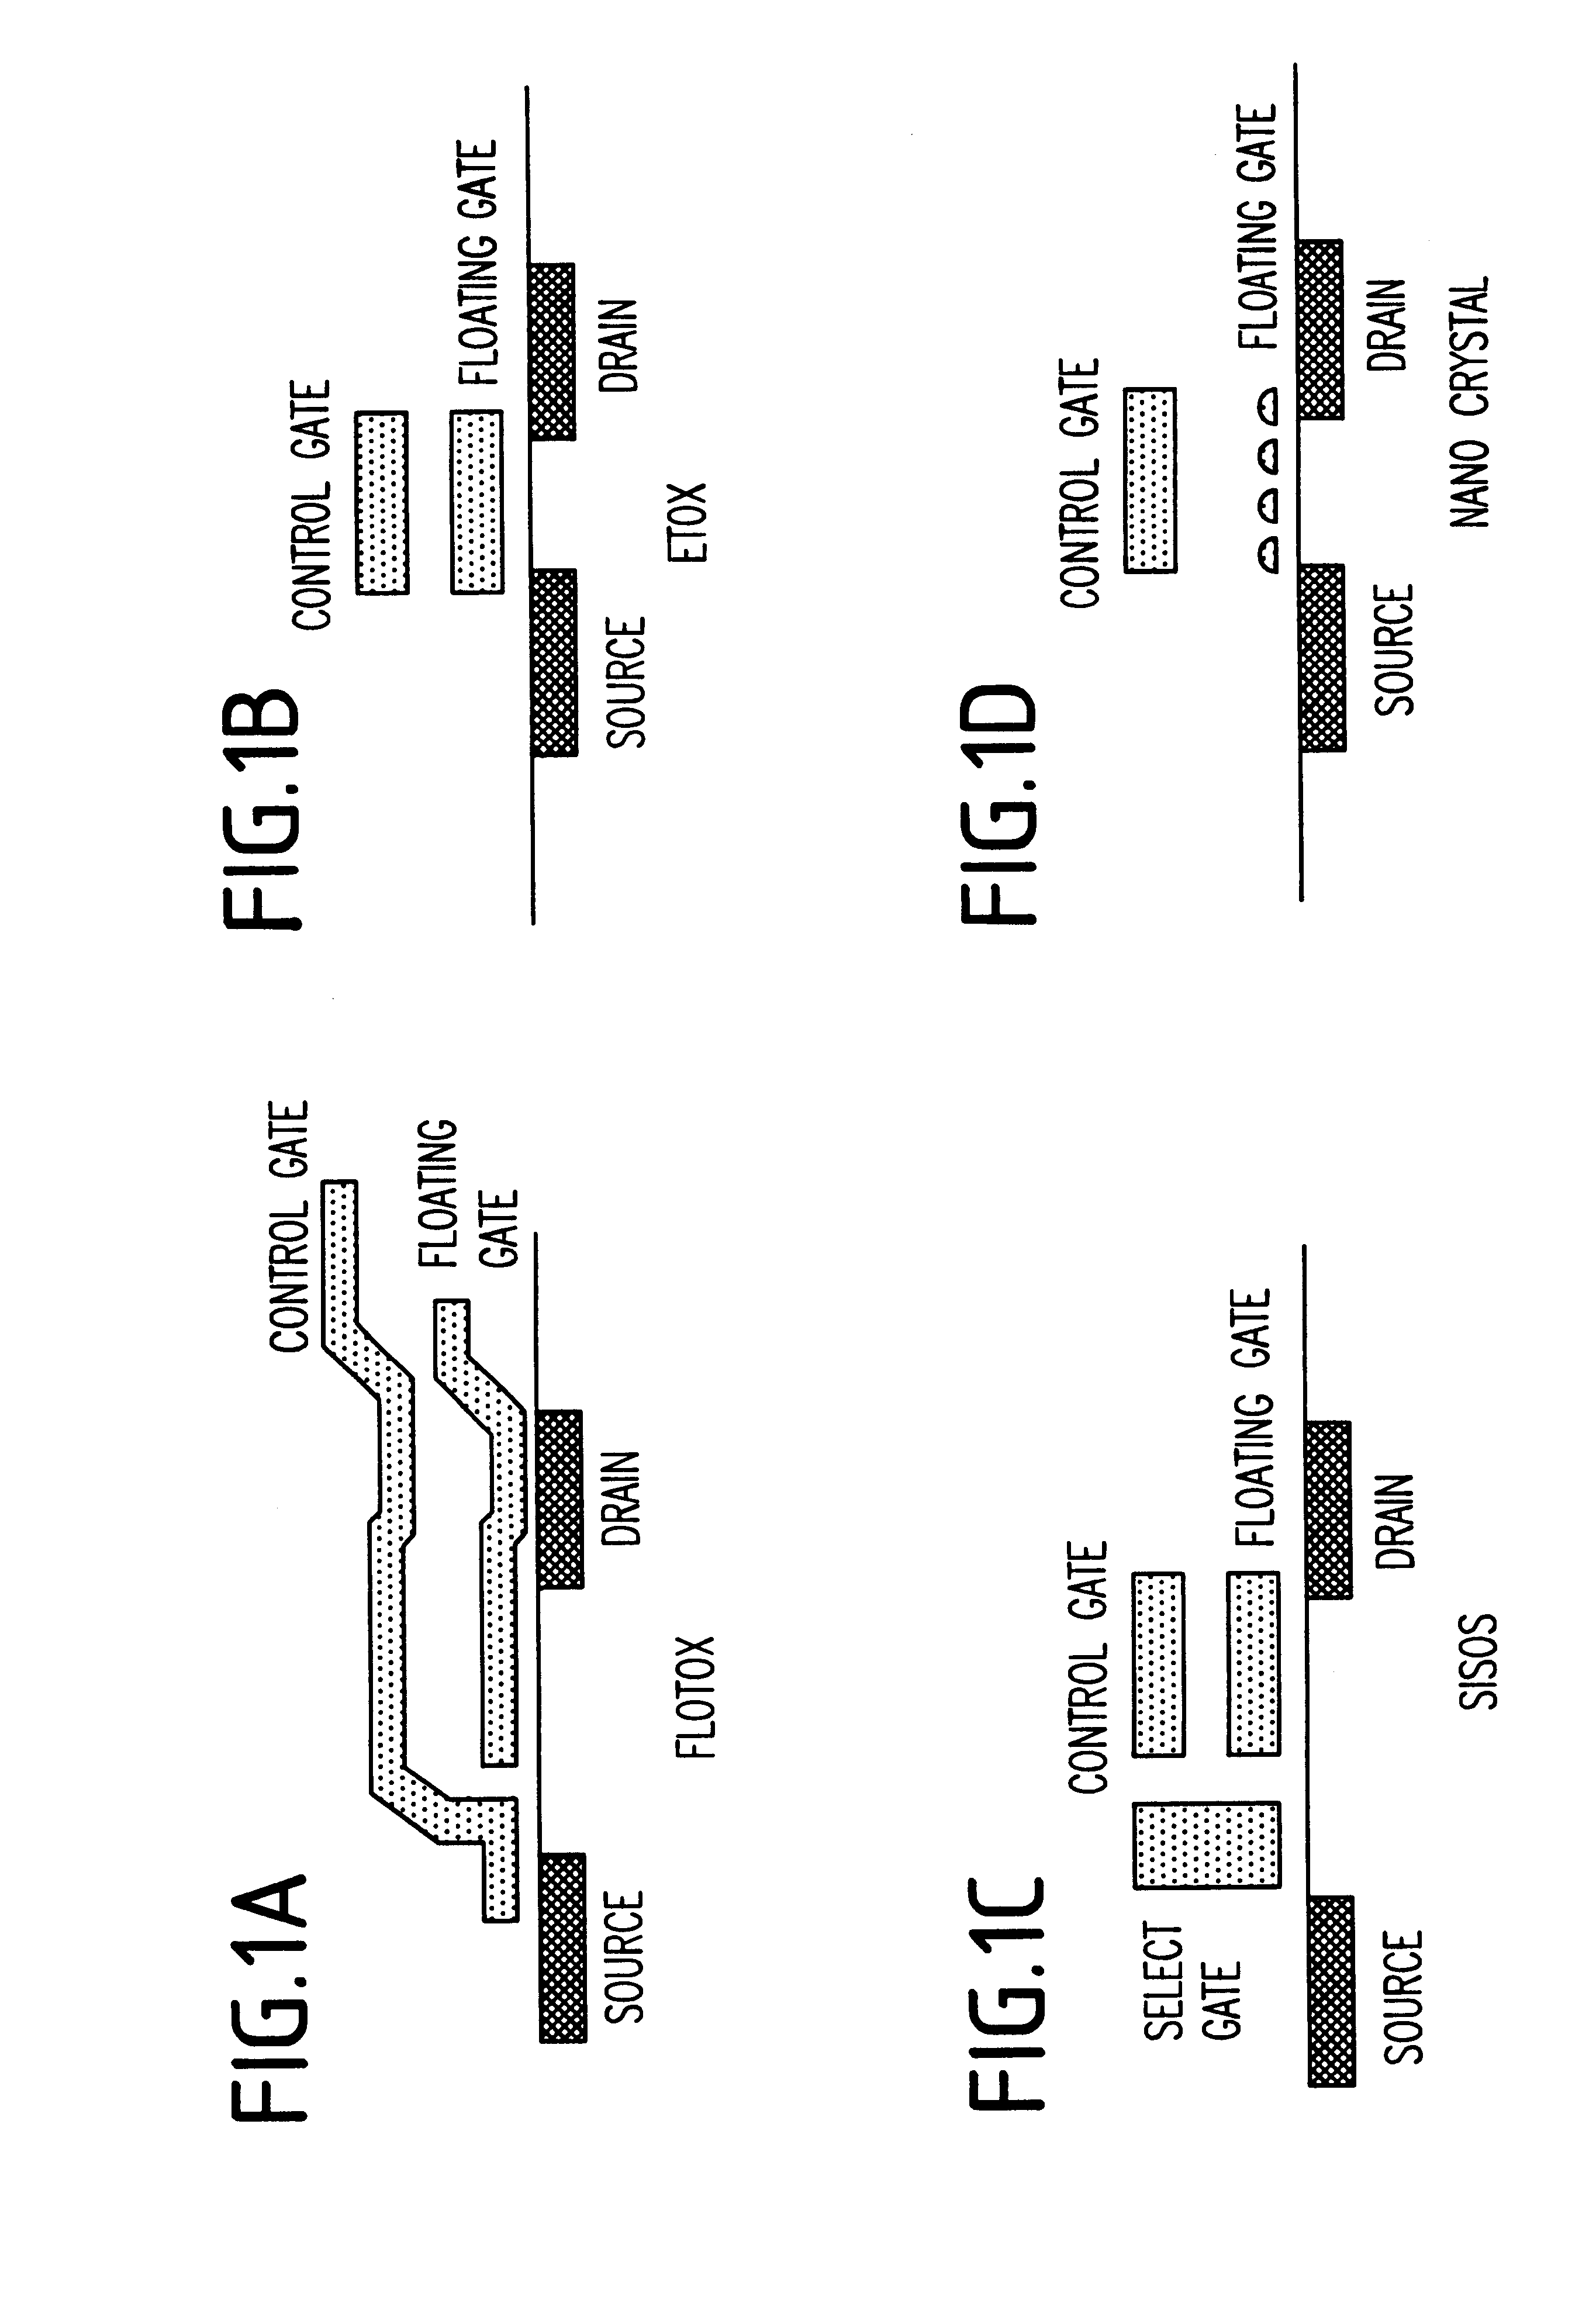 Floating back gate electrically erasable programmable read-only memory (EEPROM)